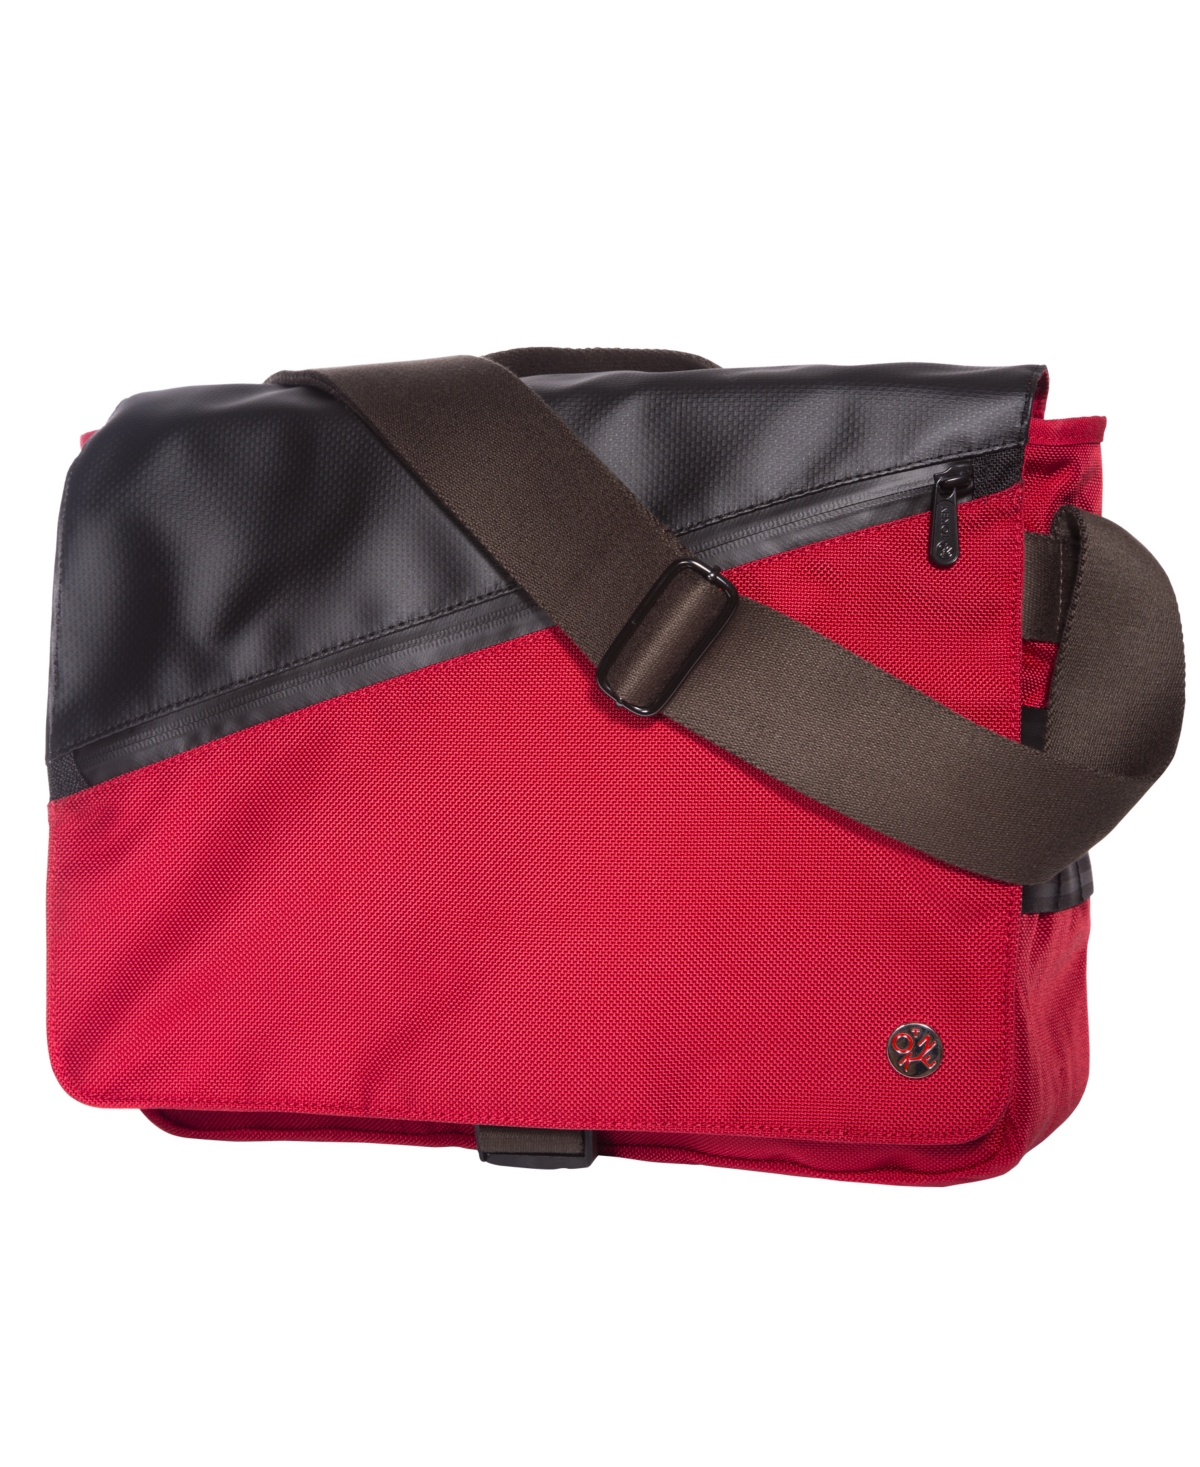 Grand Army Medium Shoulder Bag with Back Zipper - Red